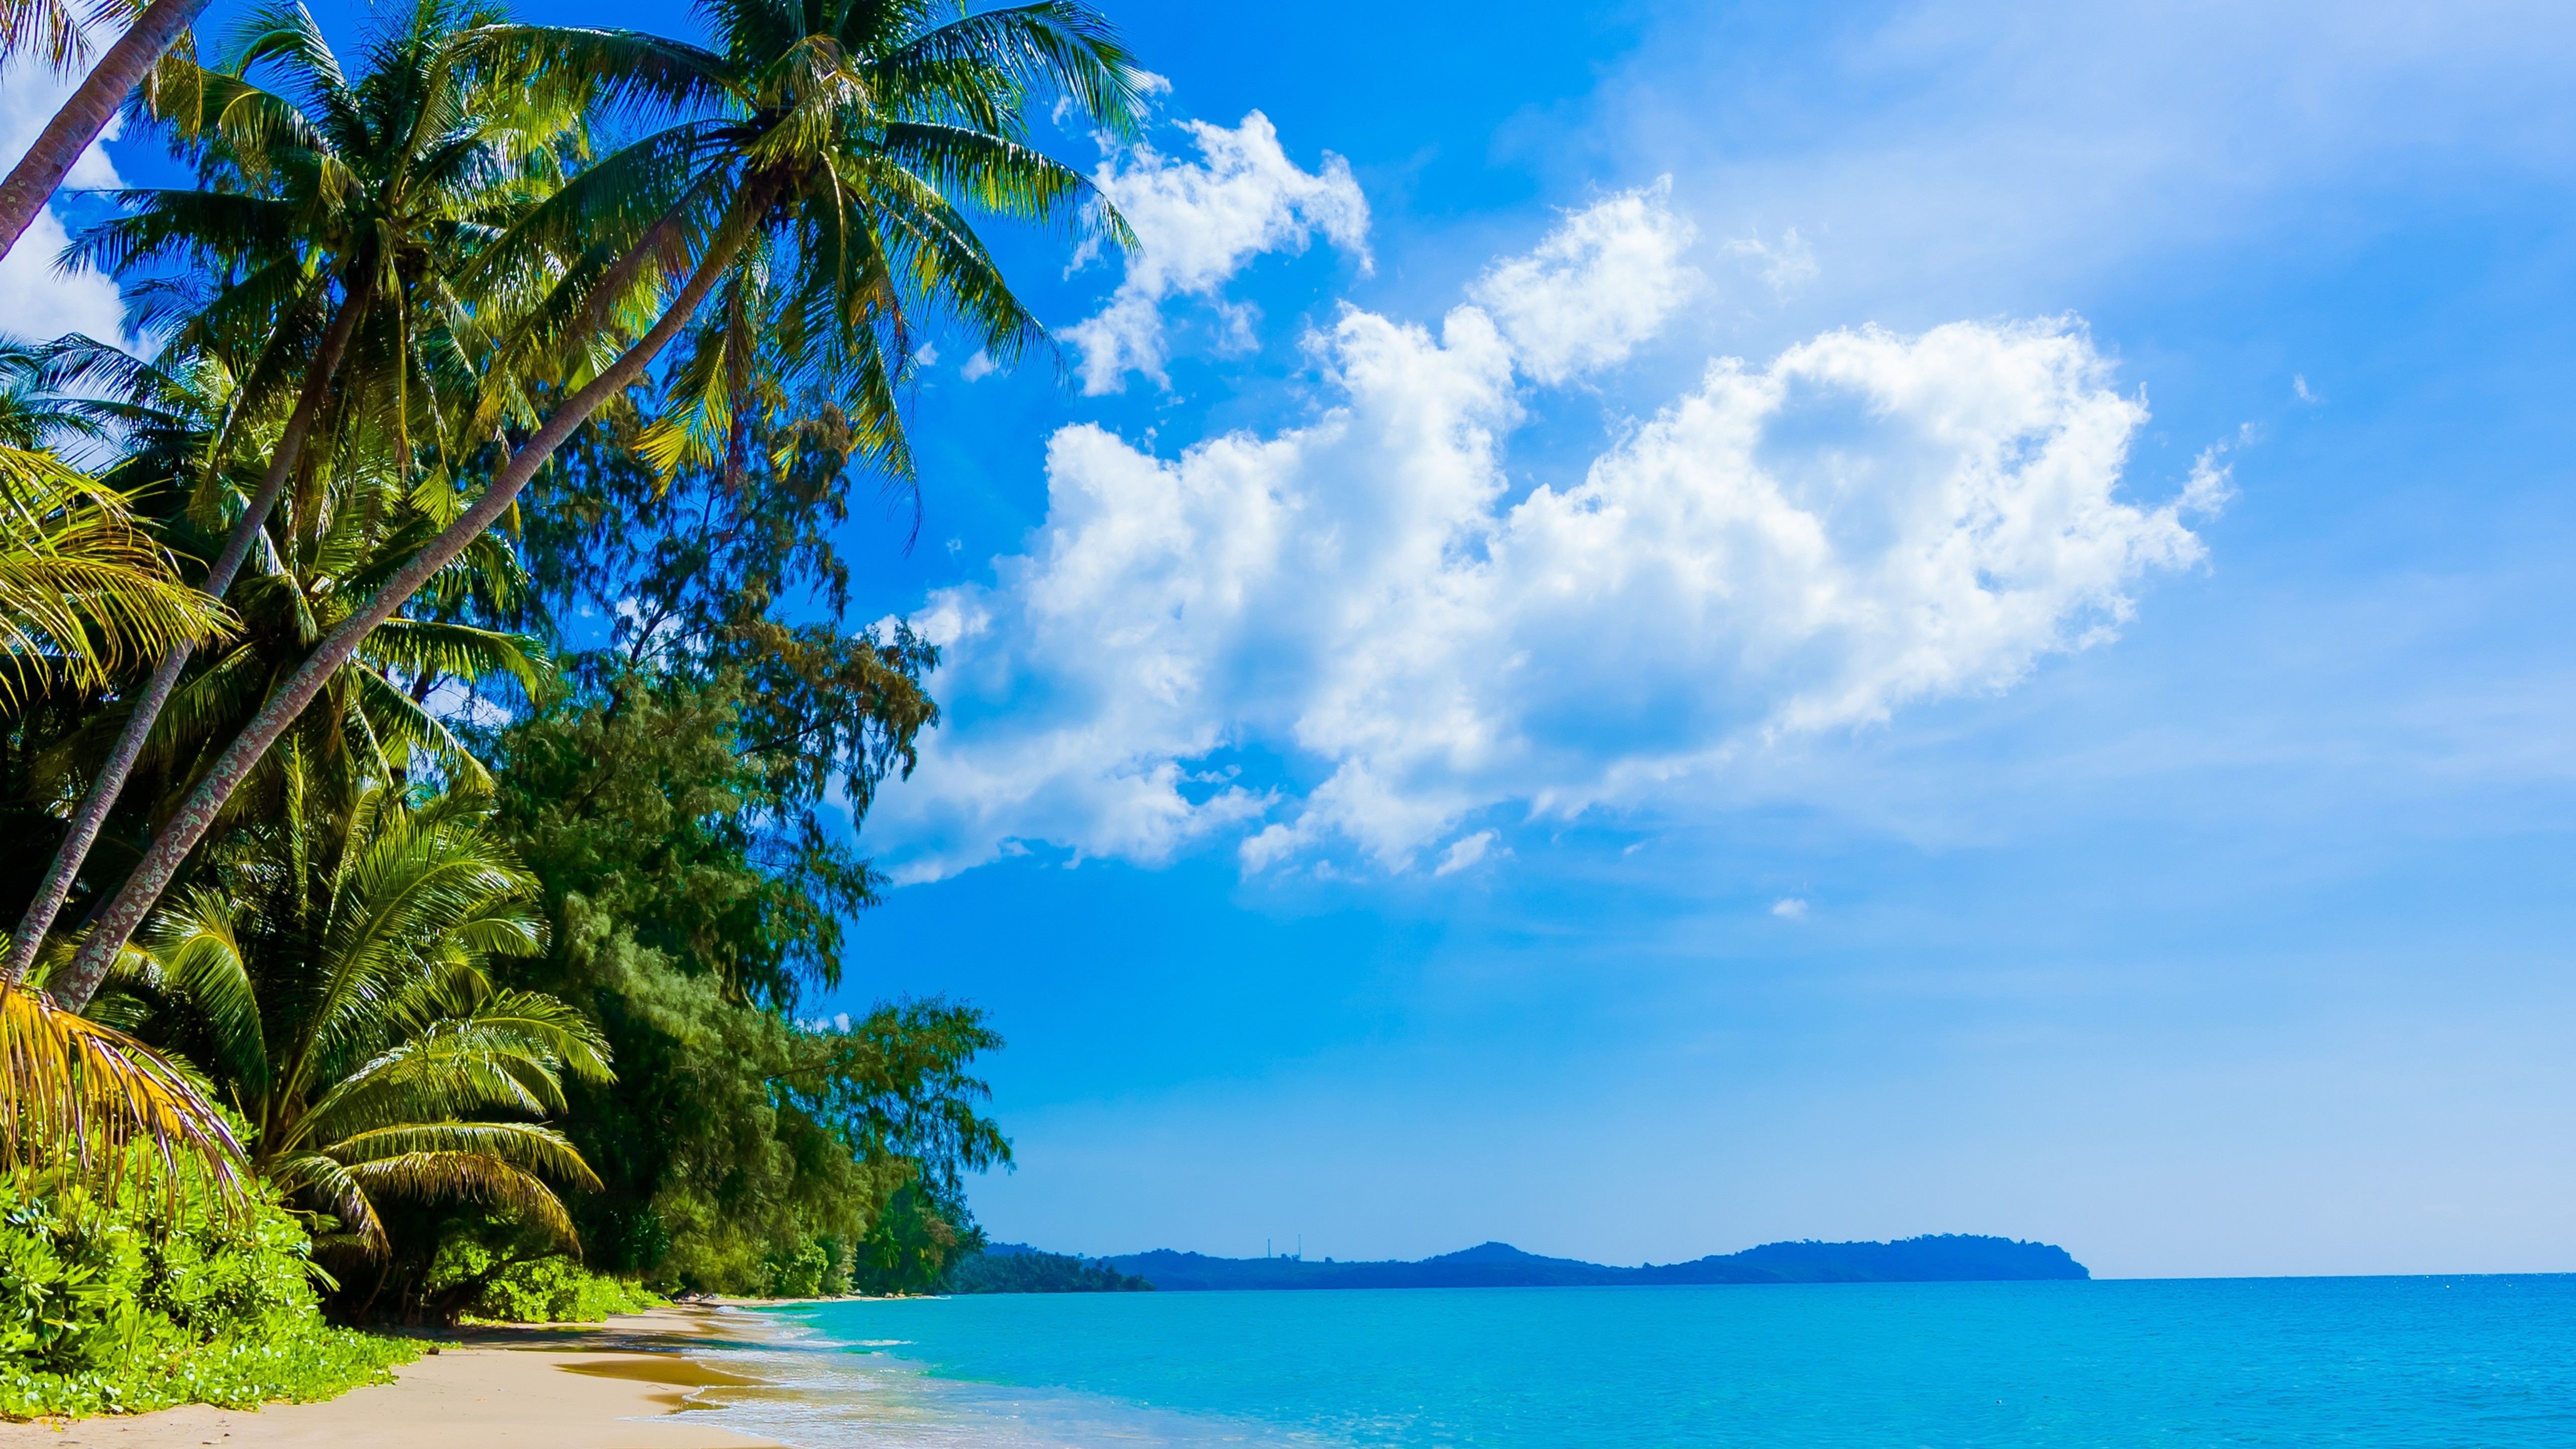 Wallpaper Download 5120x2880 Sunny day on the beach HD